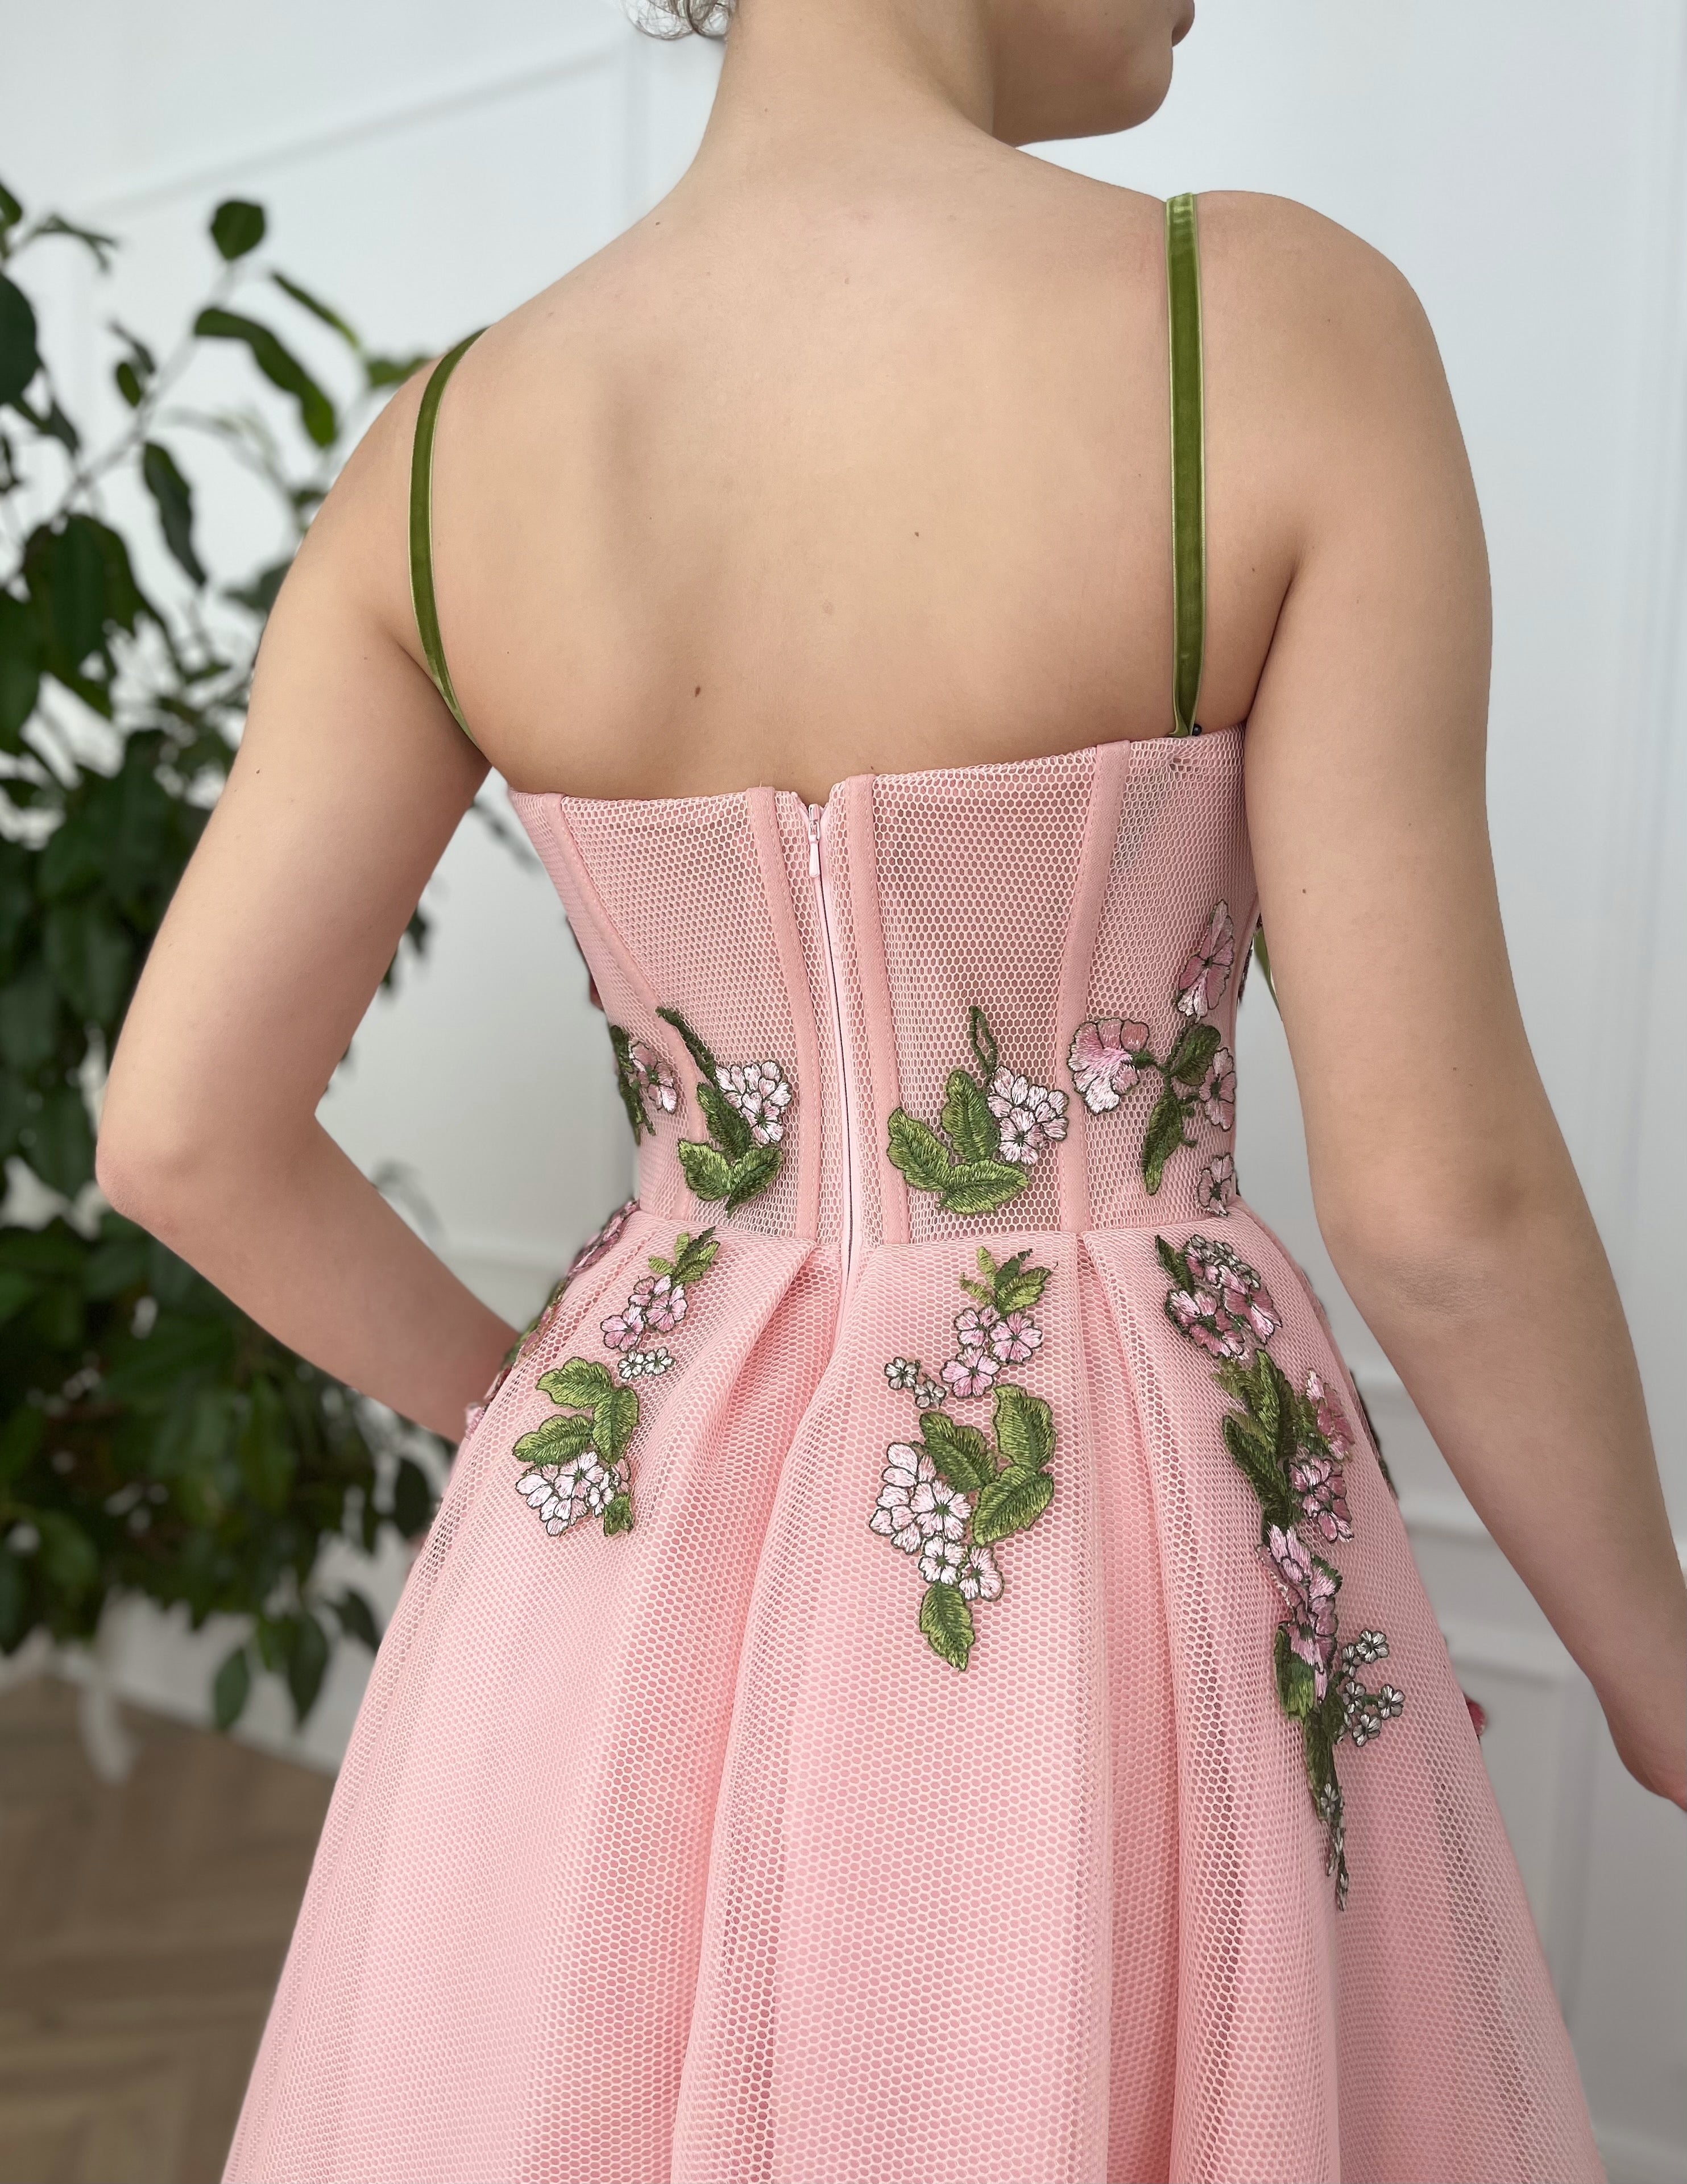 Pink A-Line dress with spaghetti straps and embroidery